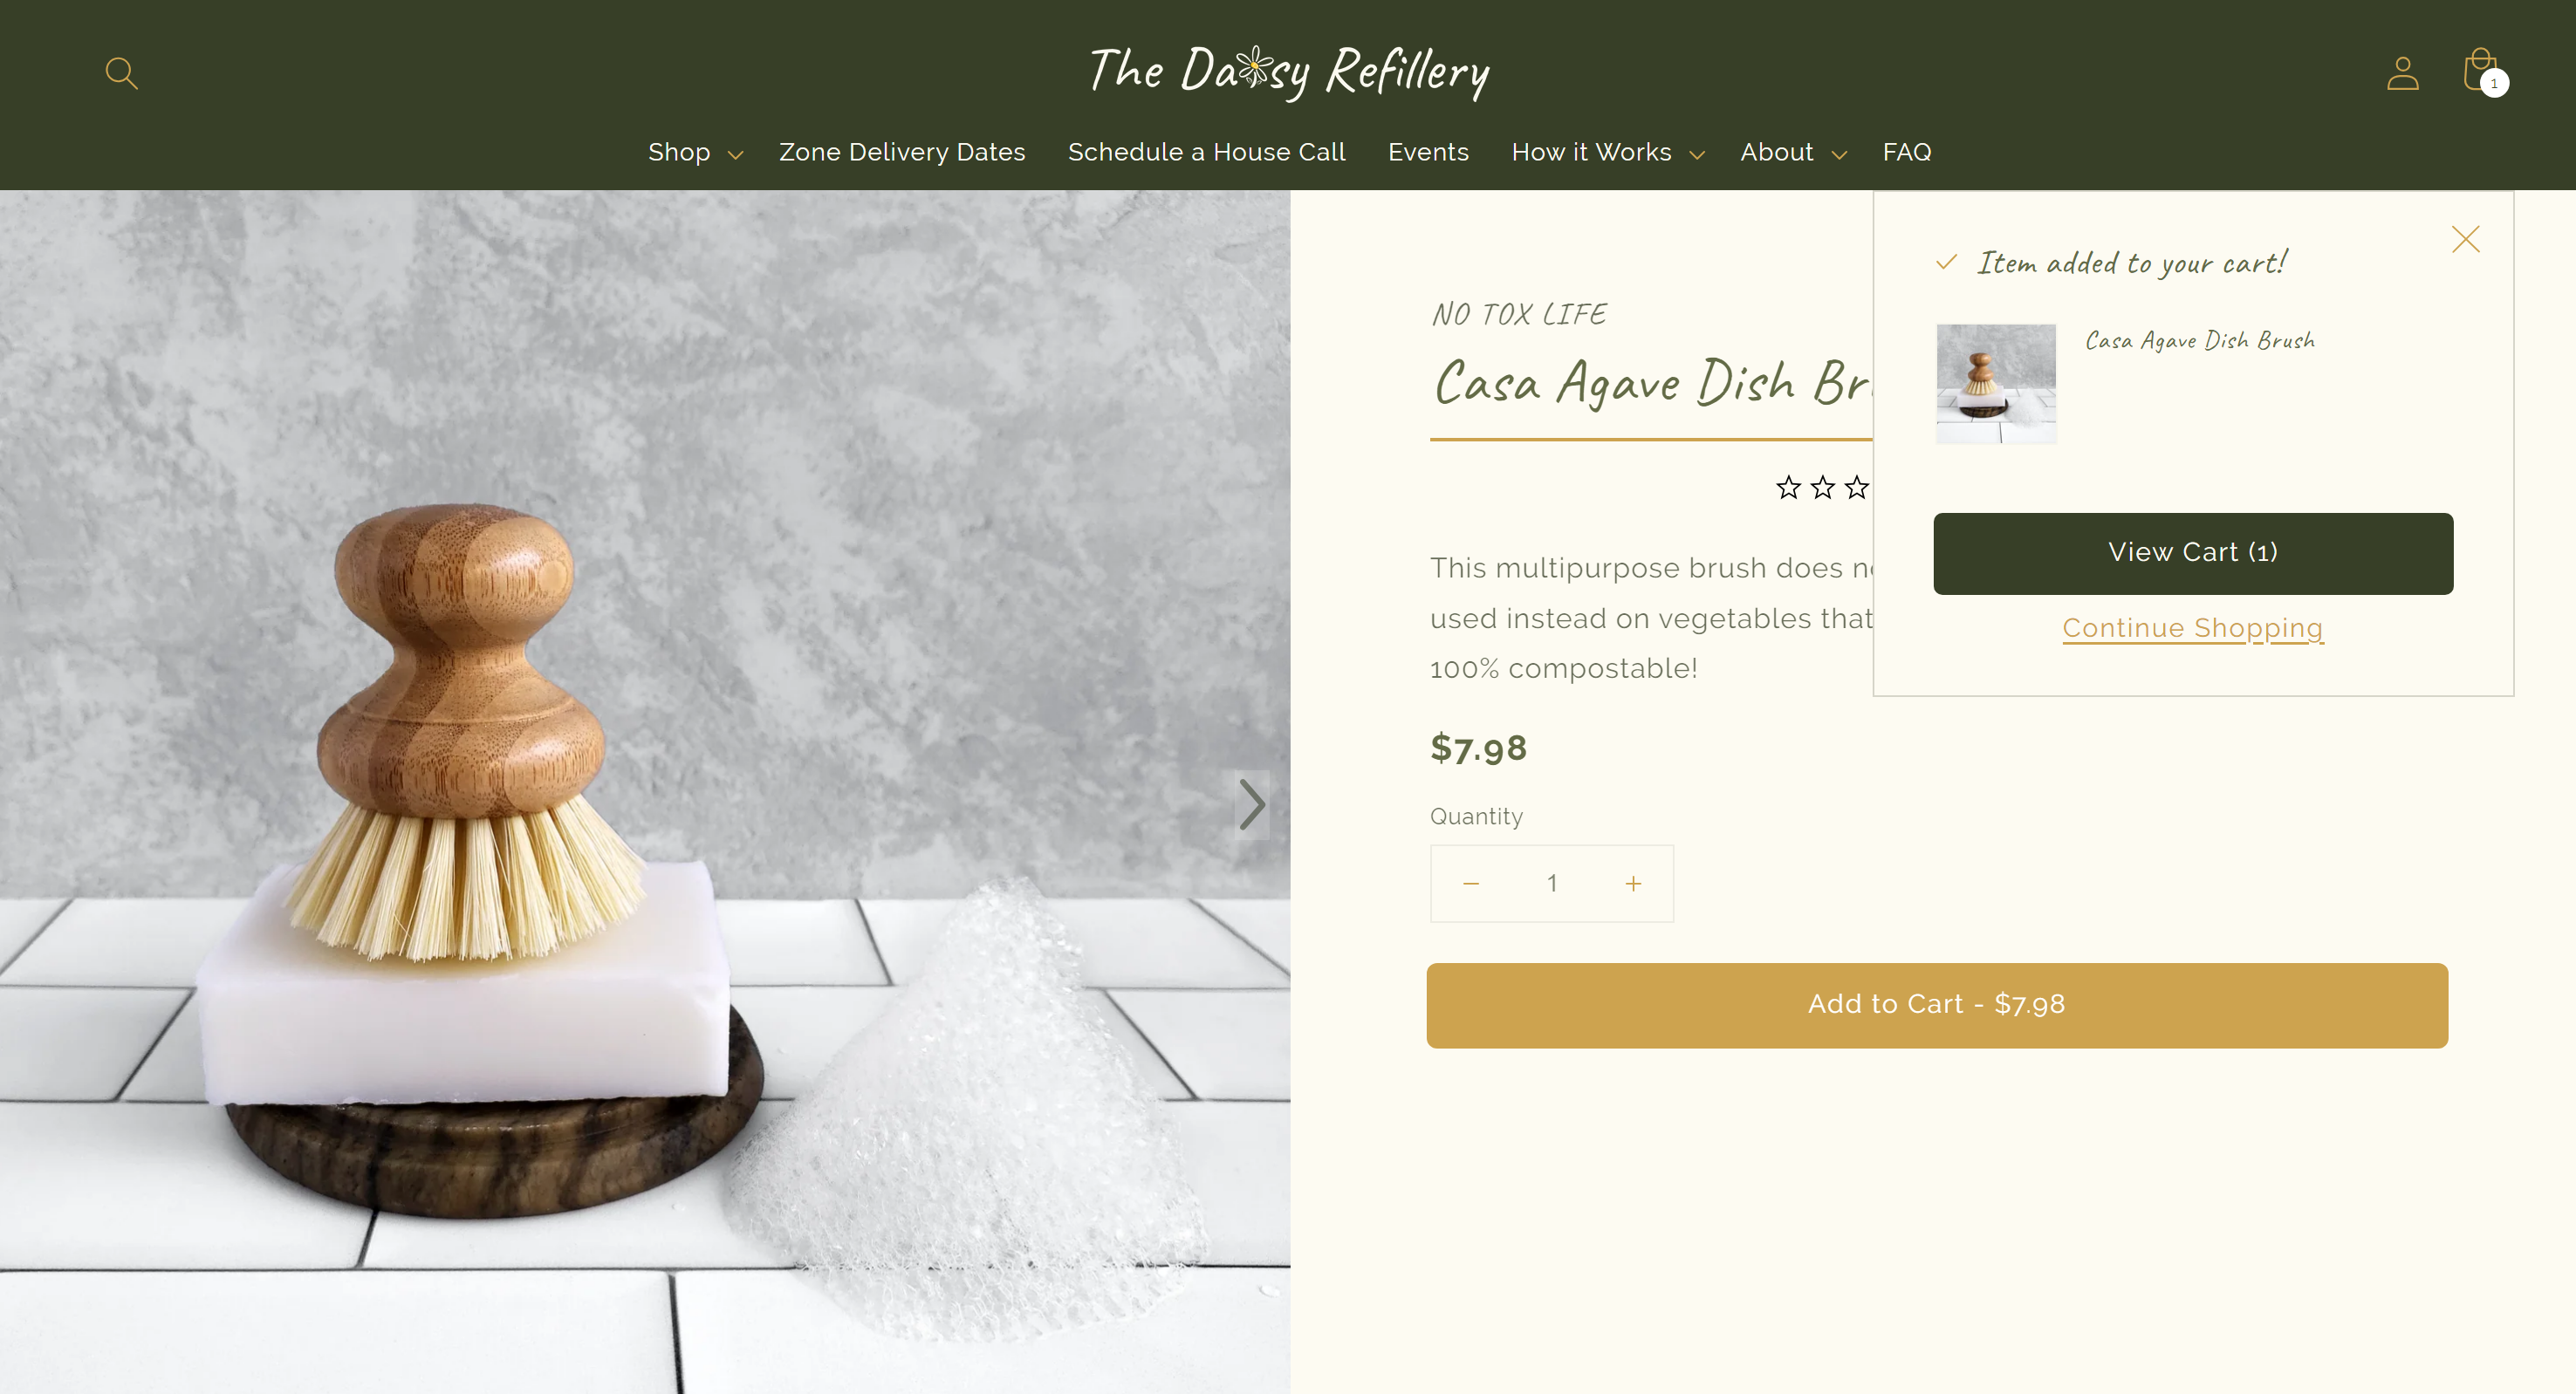 The Daisy Refillery Dish Brush Product Page